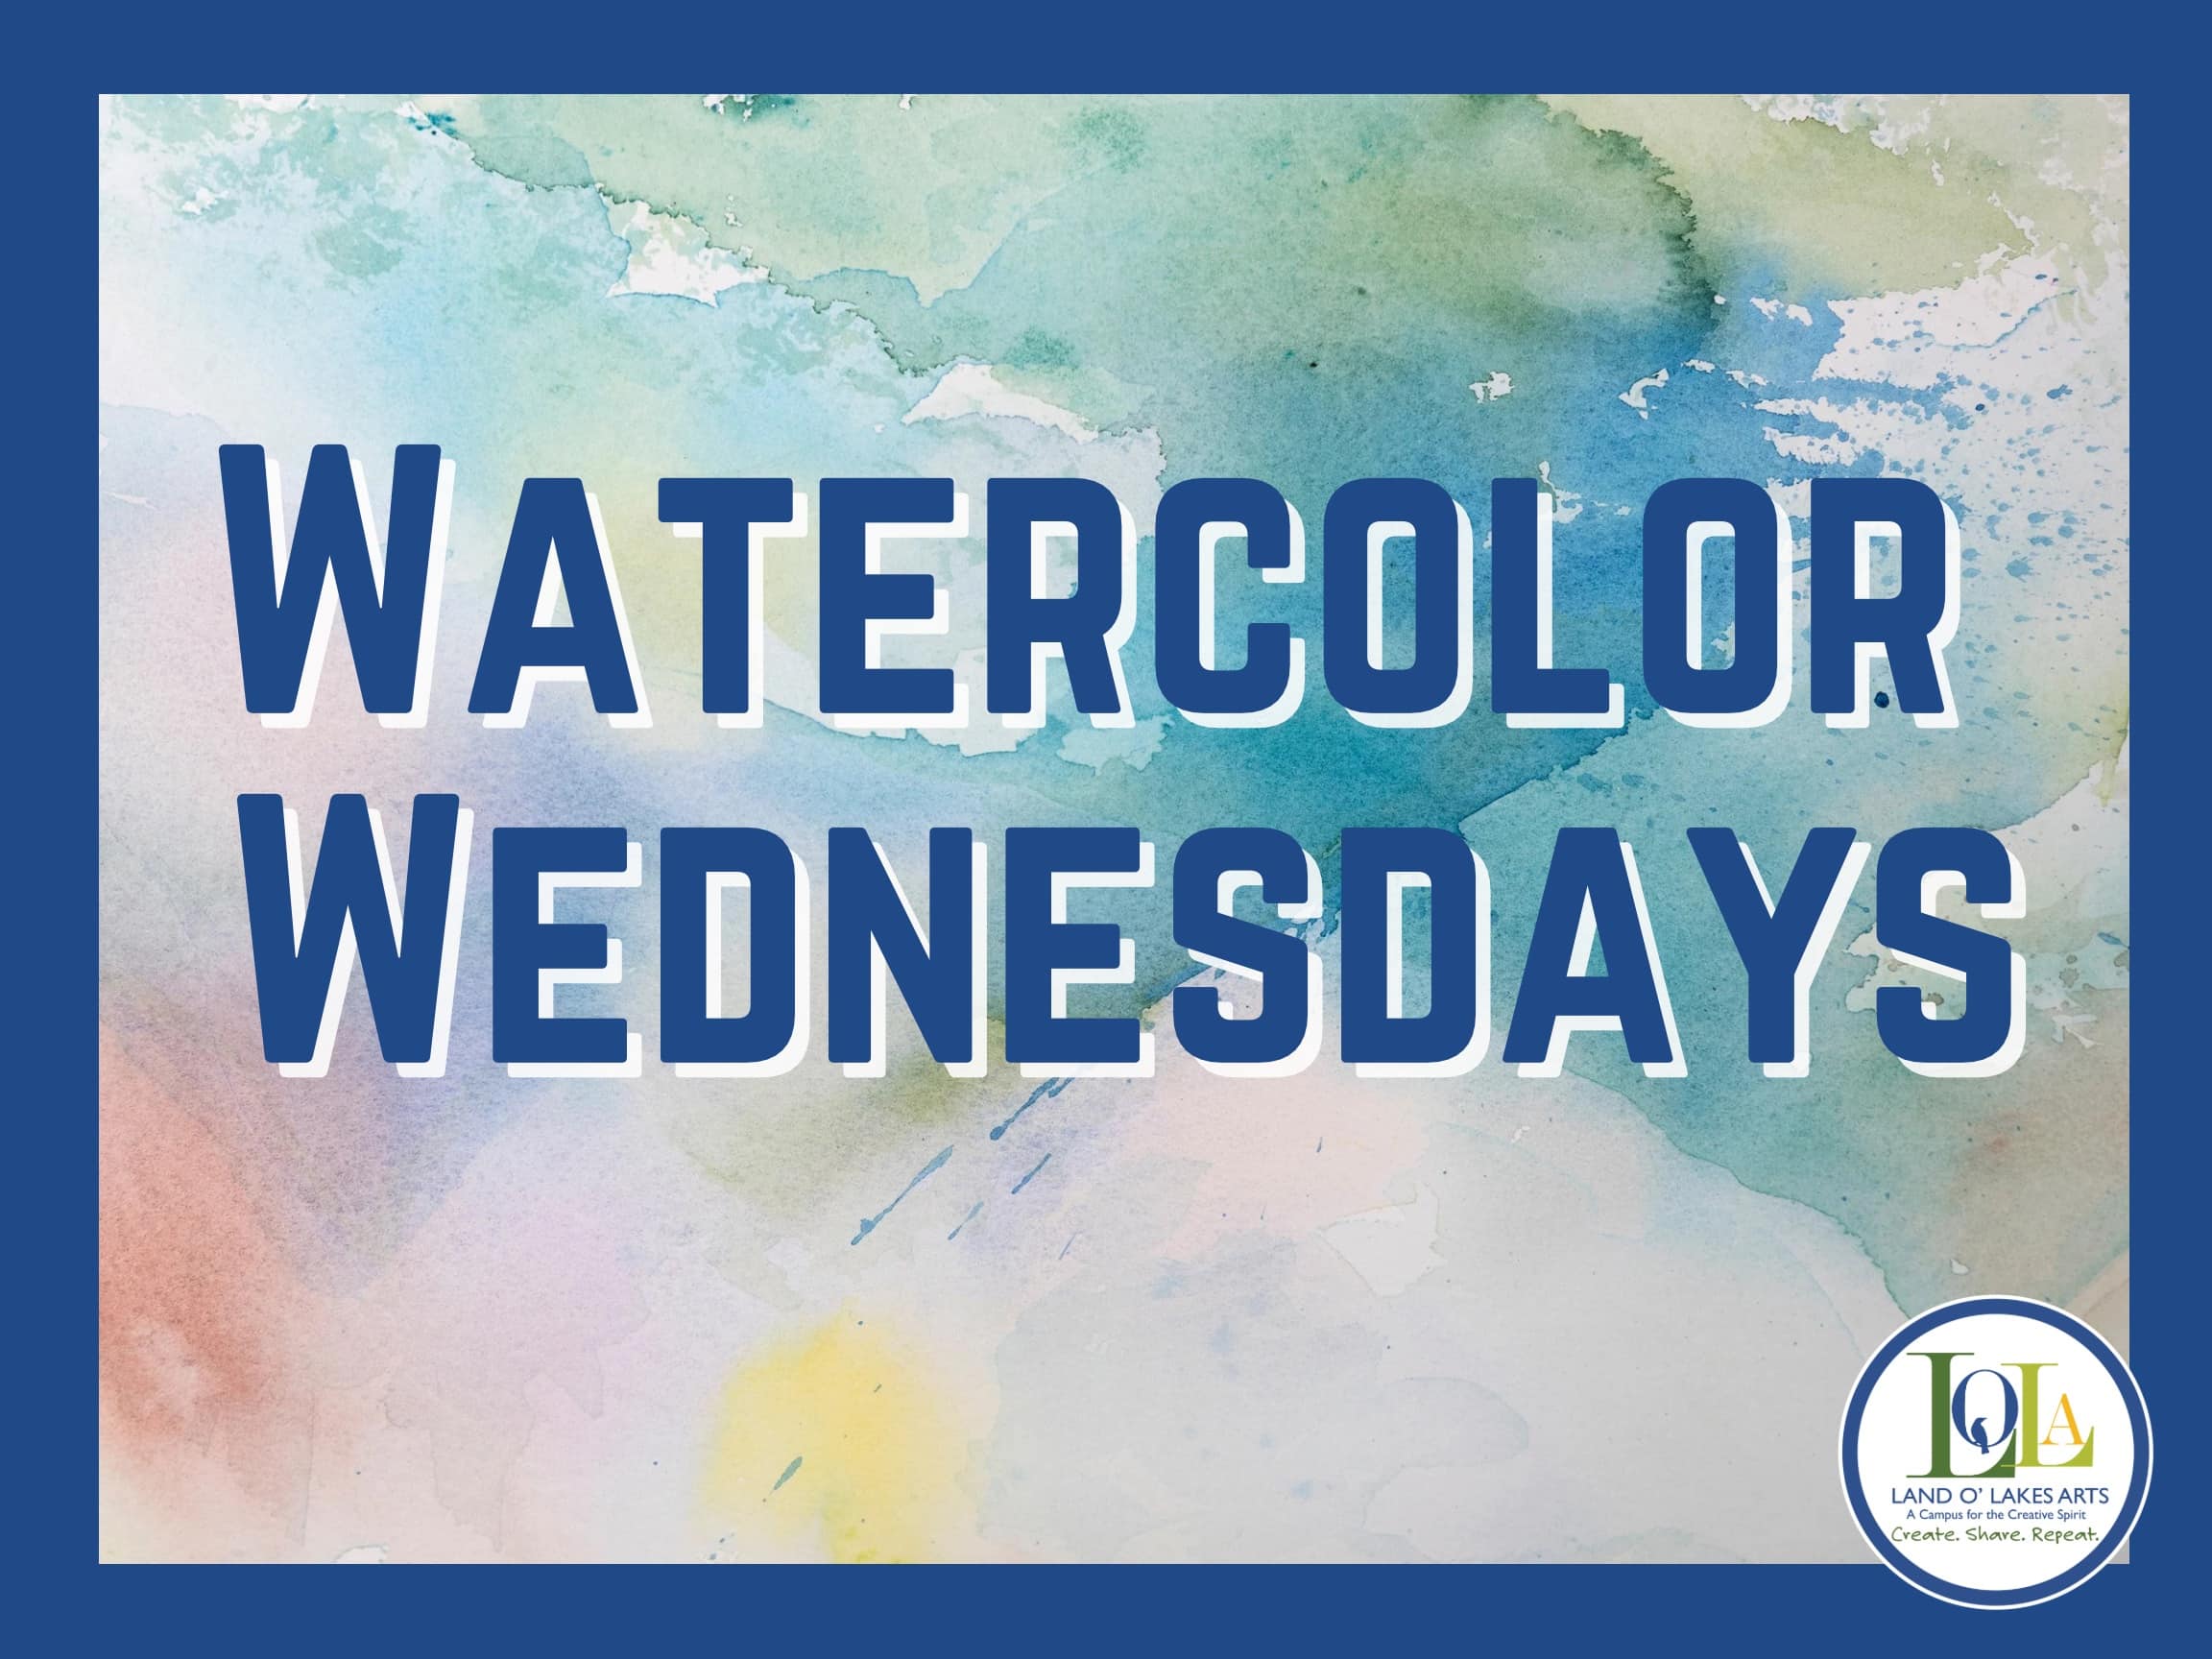 Watercolor Wednesday free art group